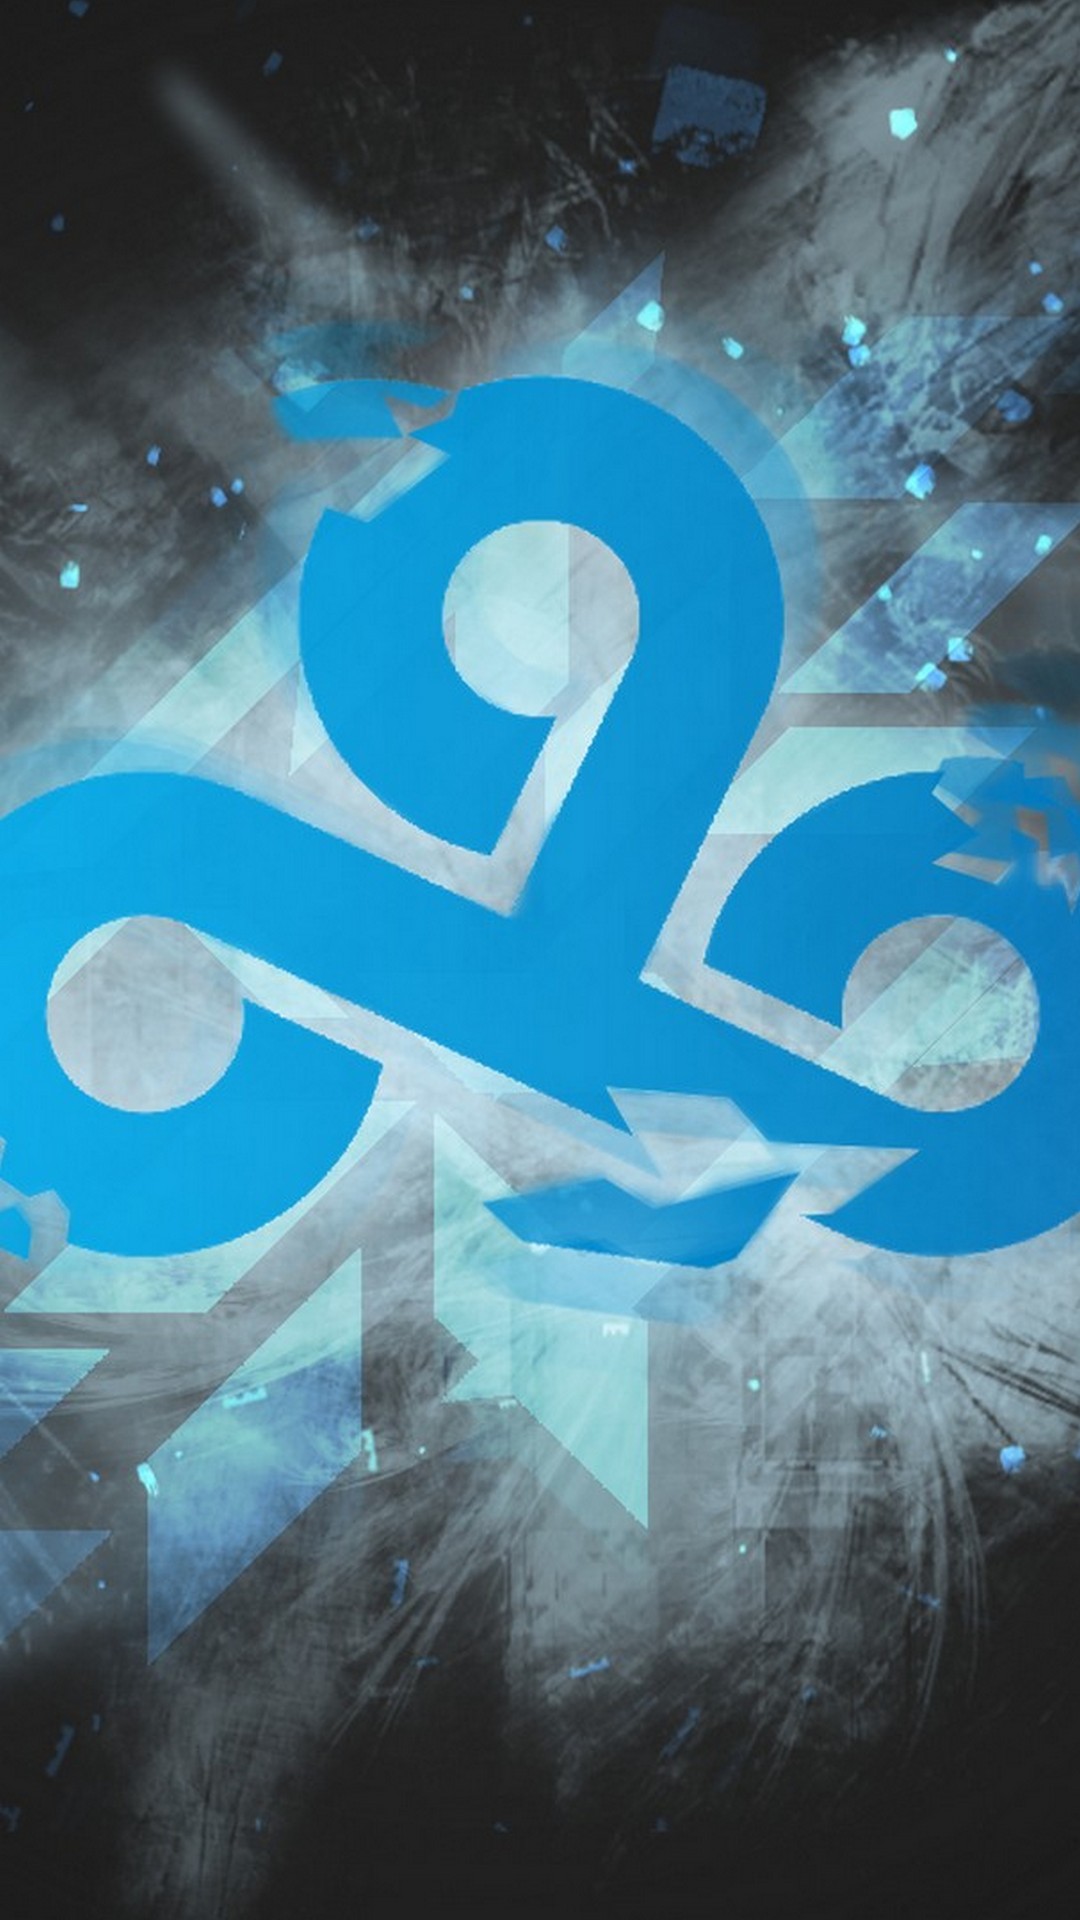 Cloud 9 HD Wallpapers For Android with HD resolution 1080x1920